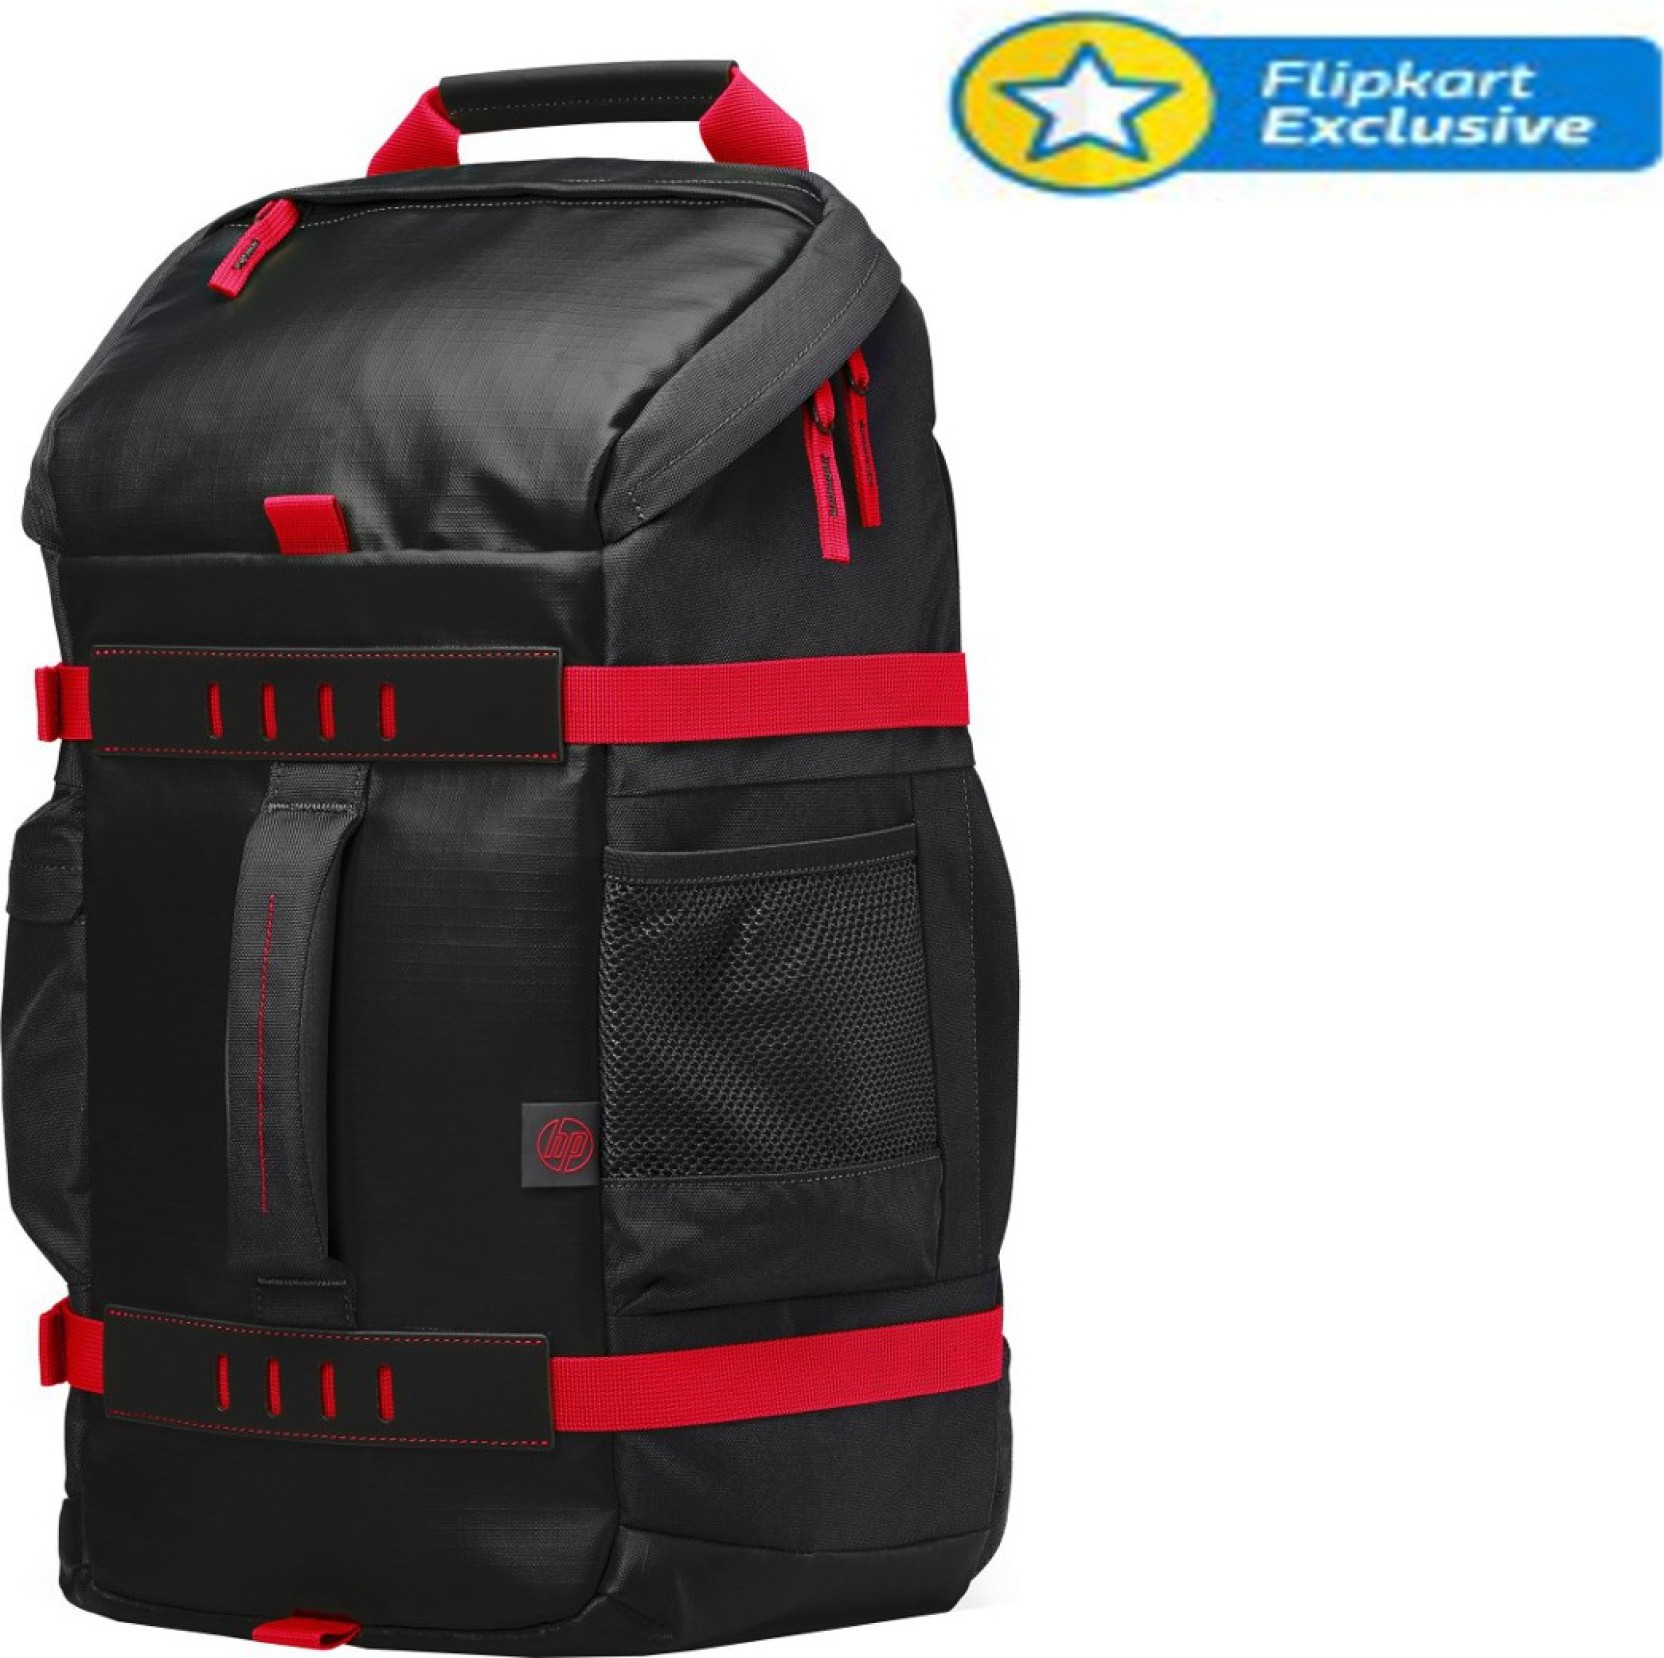 HP 15.6 inch Laptop Backpack Black, Red - Price in India | 0